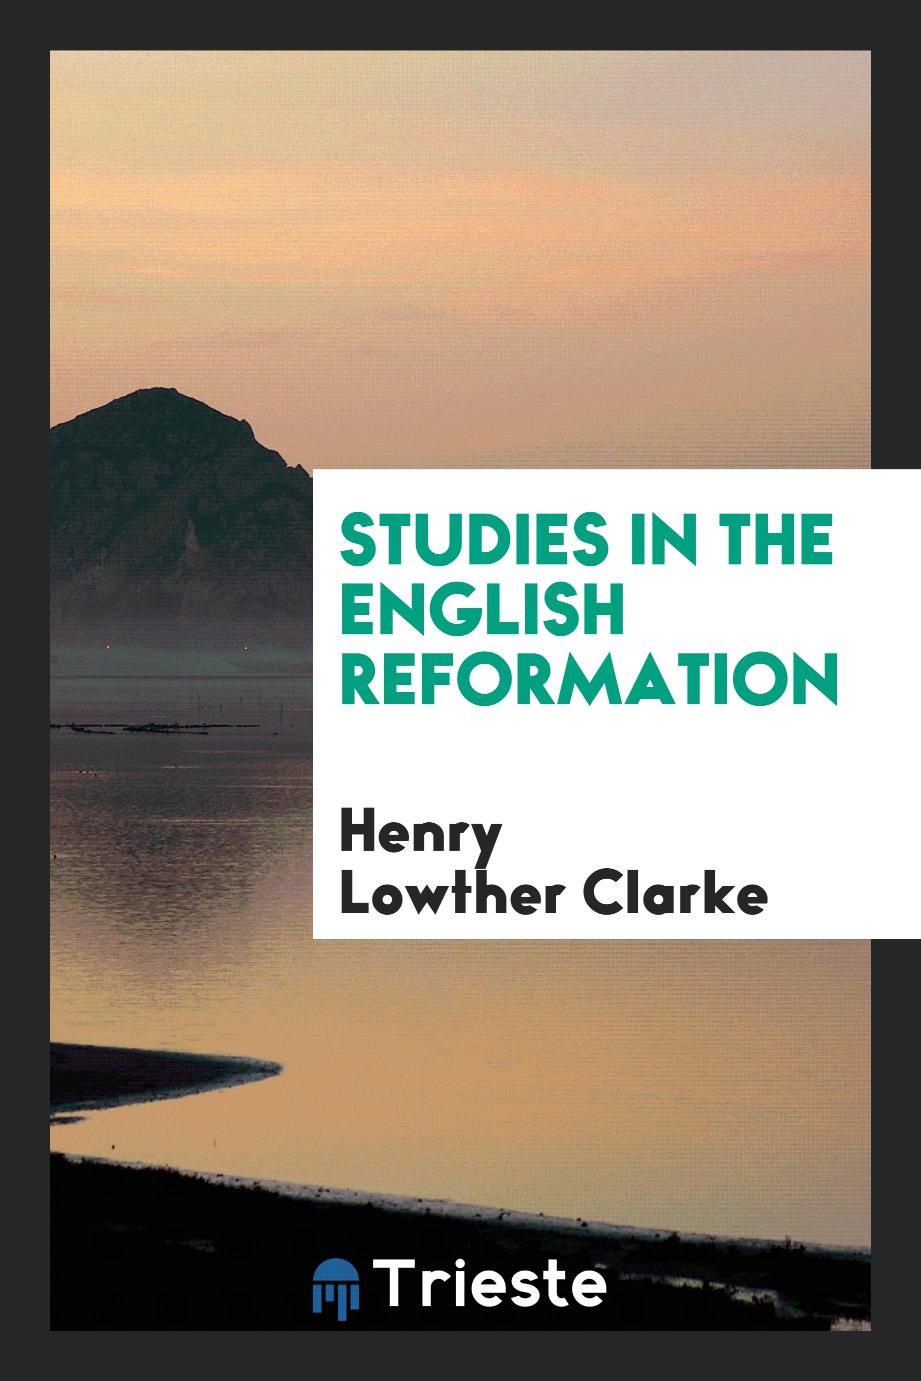 Studies in the English reformation